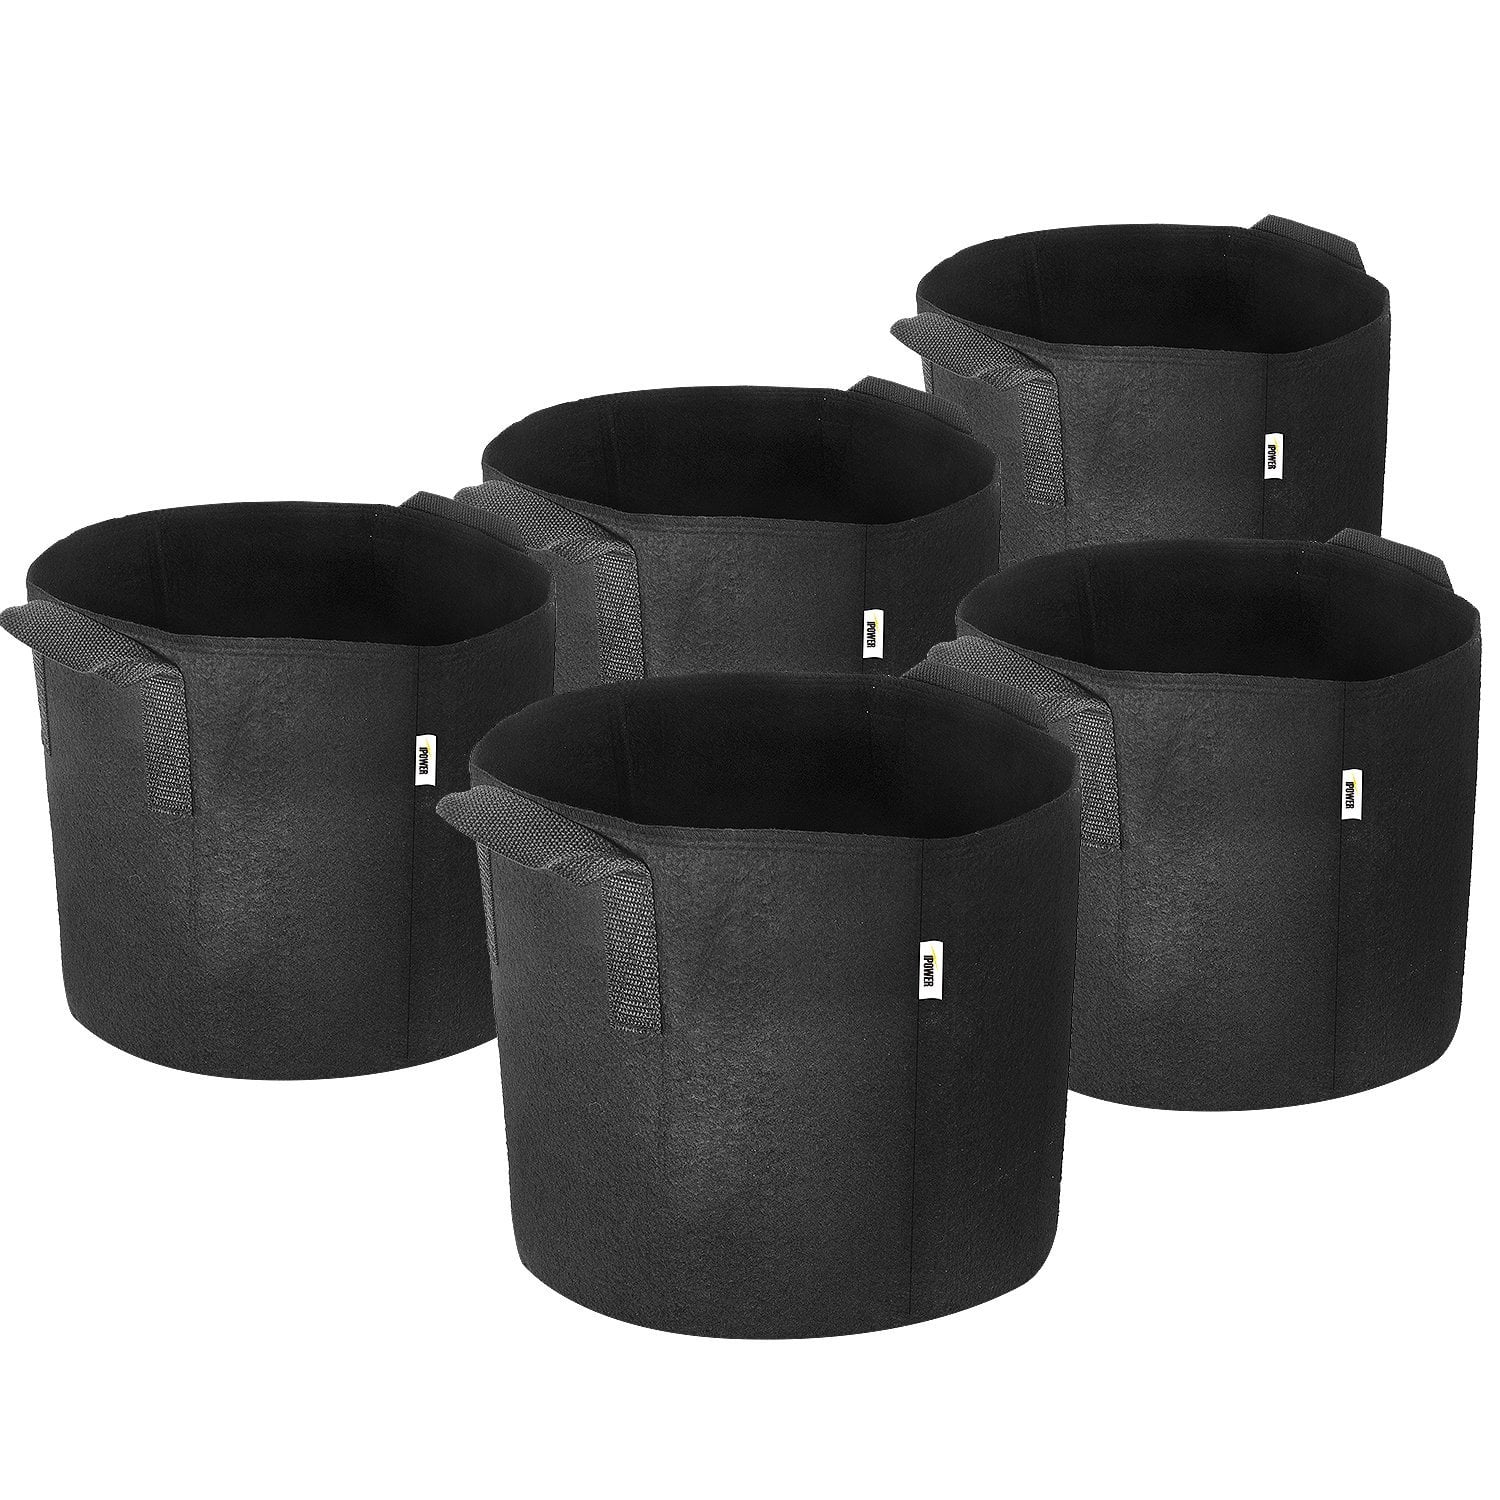 Home Round Plant Pouch Fabric Pots Root Container Grow Bag Aeration Container 